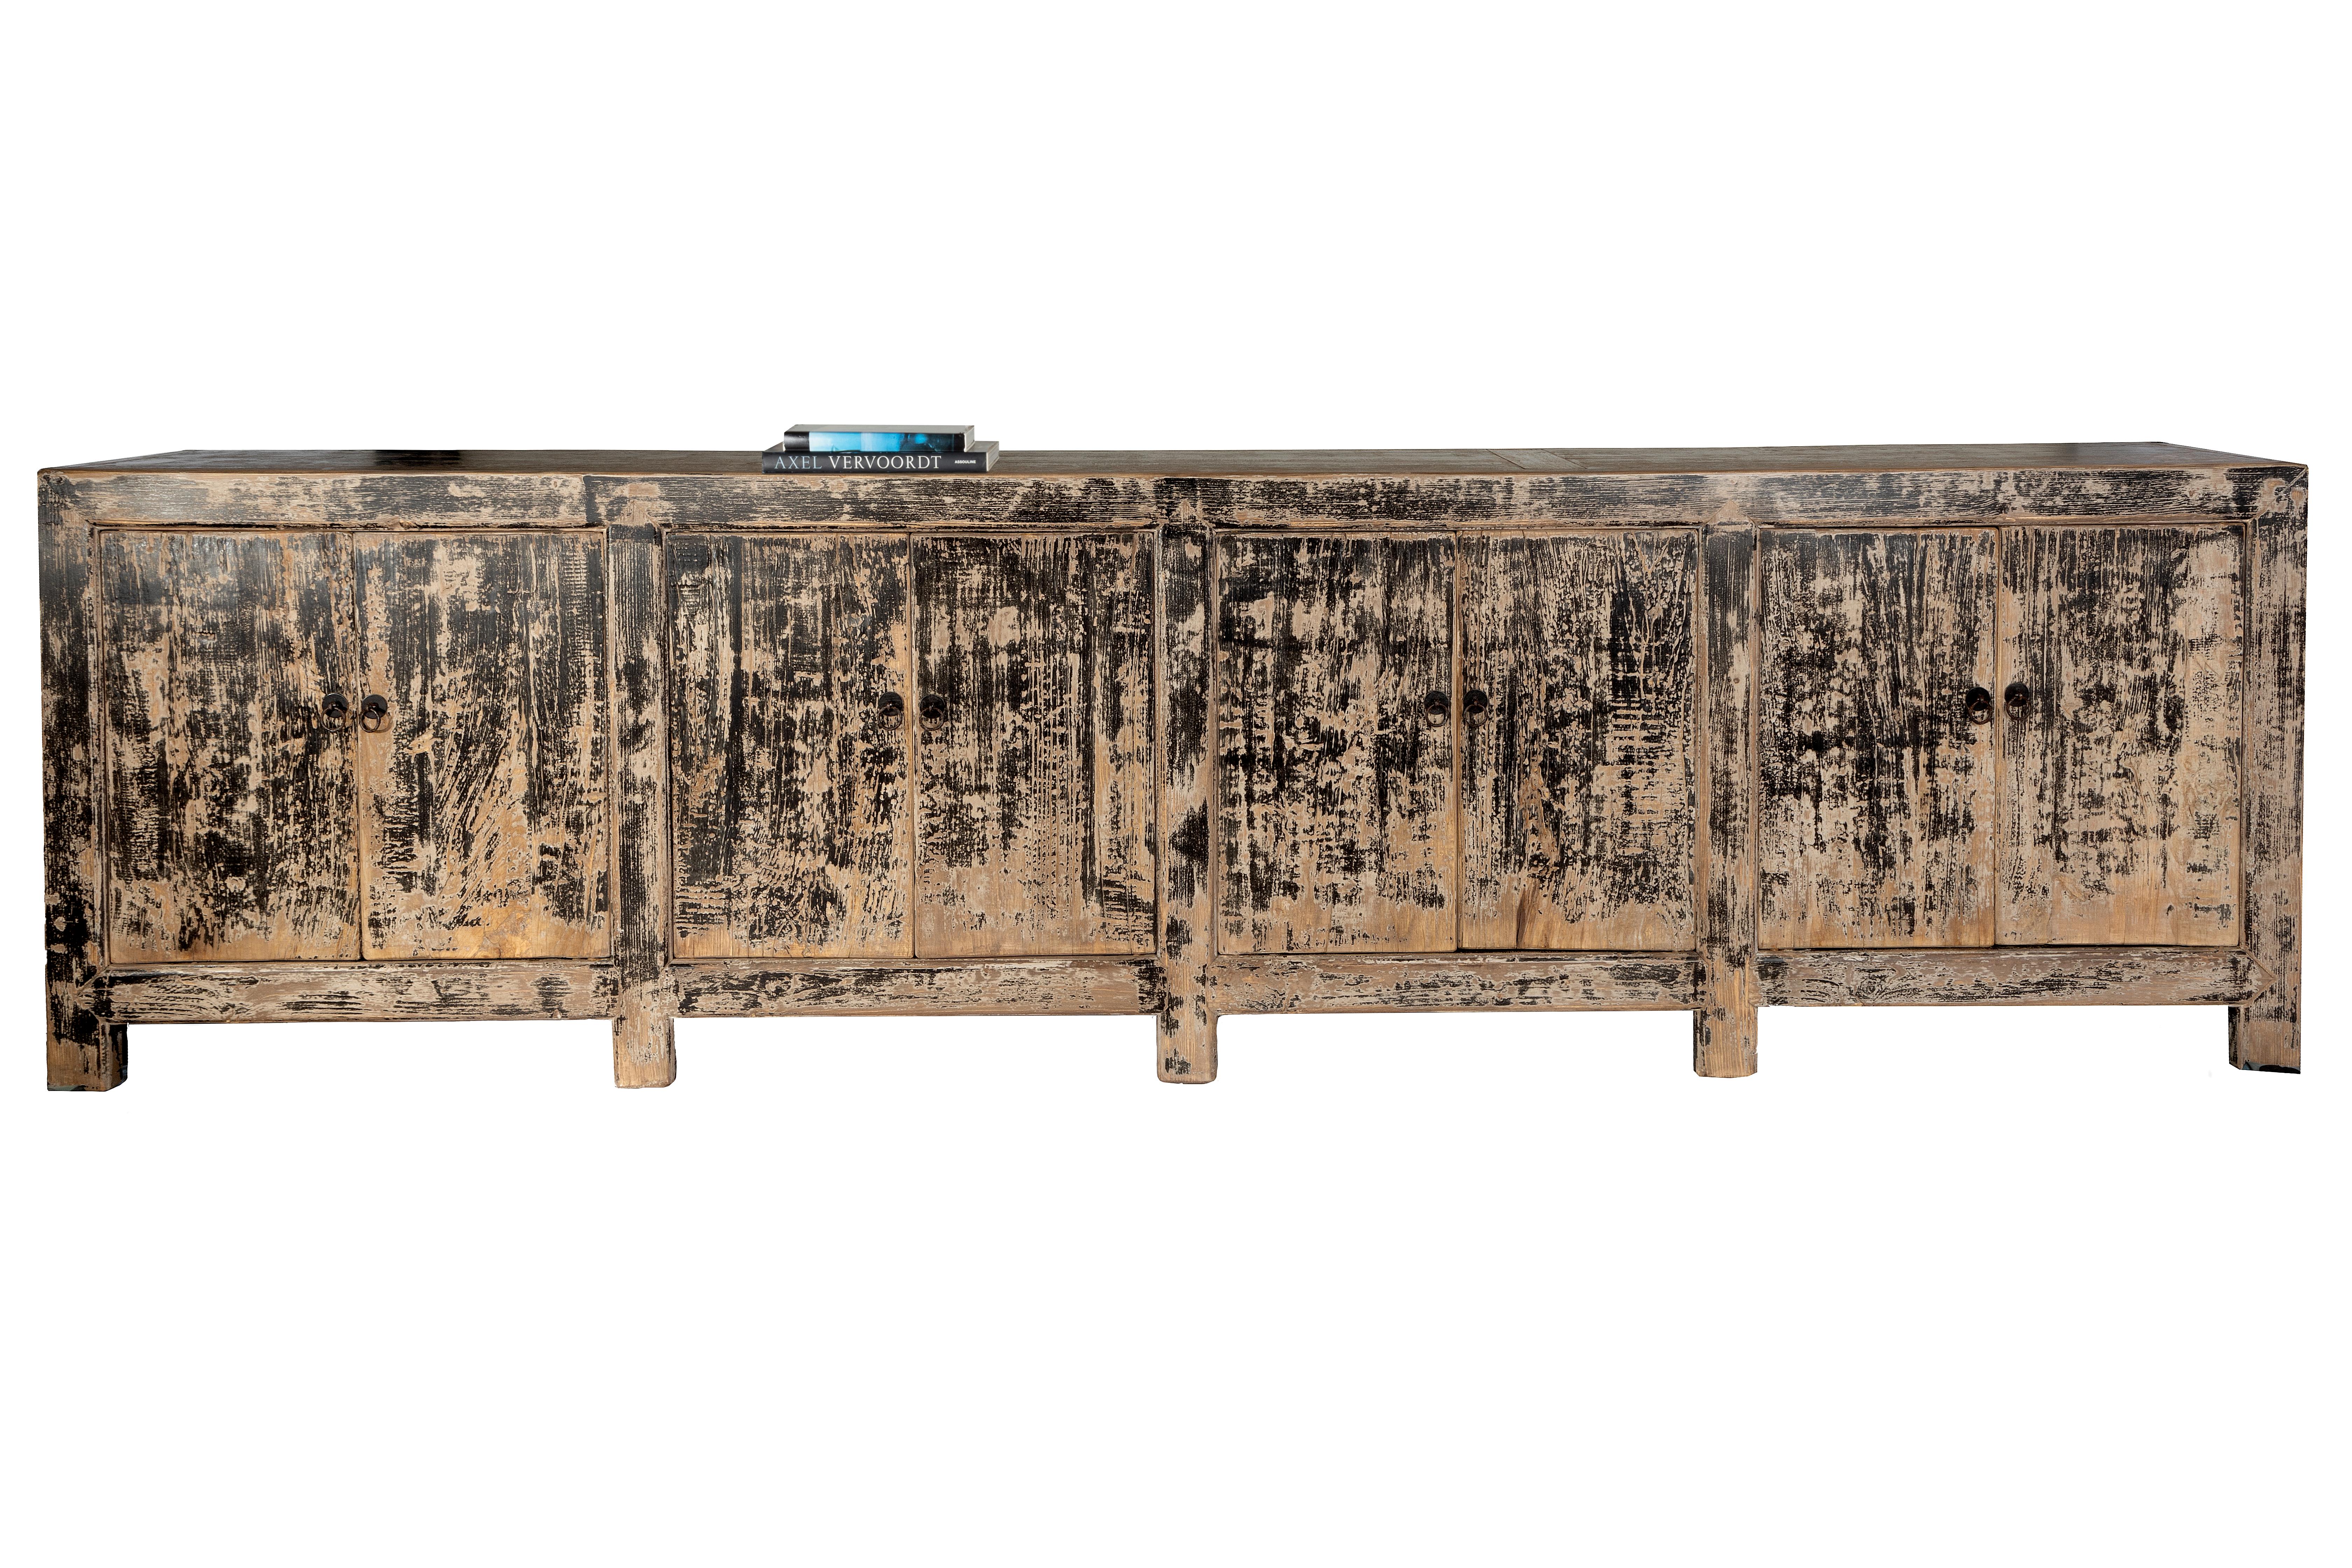 This piece is a part of Brendan Bass’s one-of-a-kind collection, Le Monde. French for “The World”, the Le Monde collection is made up of rare and hard to find pieces curated by Brendan from estate sales, brocantes, and anywhere beautiful pieces can